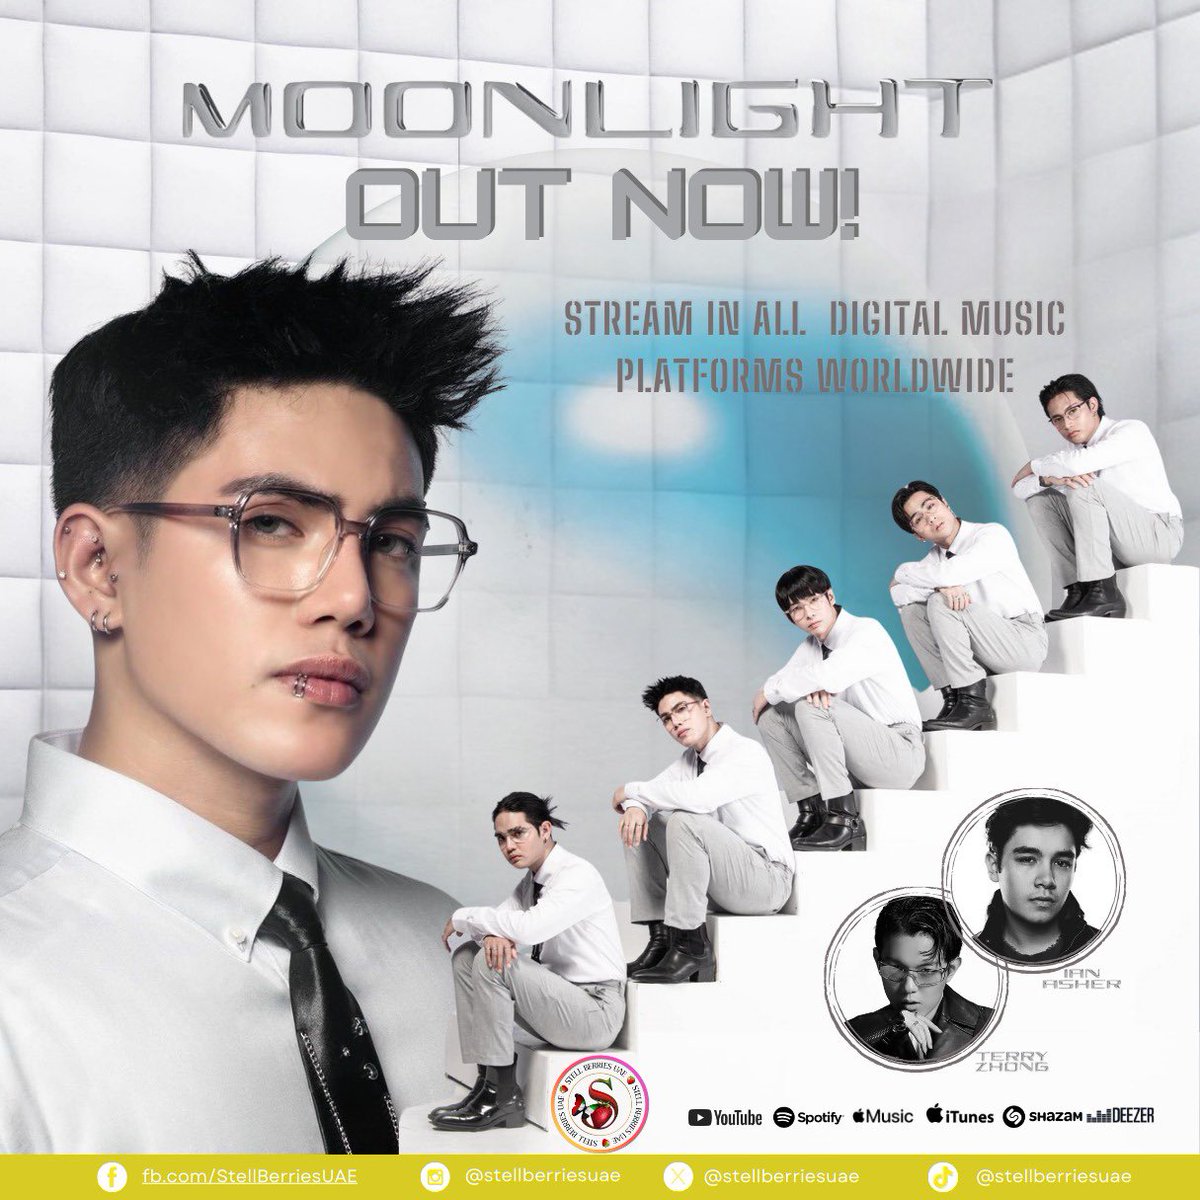 ⚪️ 'Moonlight' is here to light up your playlists! Available now on all major digital music platforms worldwide. Berries and A'tin, let's skyrocket this tune and keep it reigning as the Song of the Year! 🚀 Listen here: open.spotify.com/track/1xAYG31L… @stellajero_ @SB19Official #SB19…